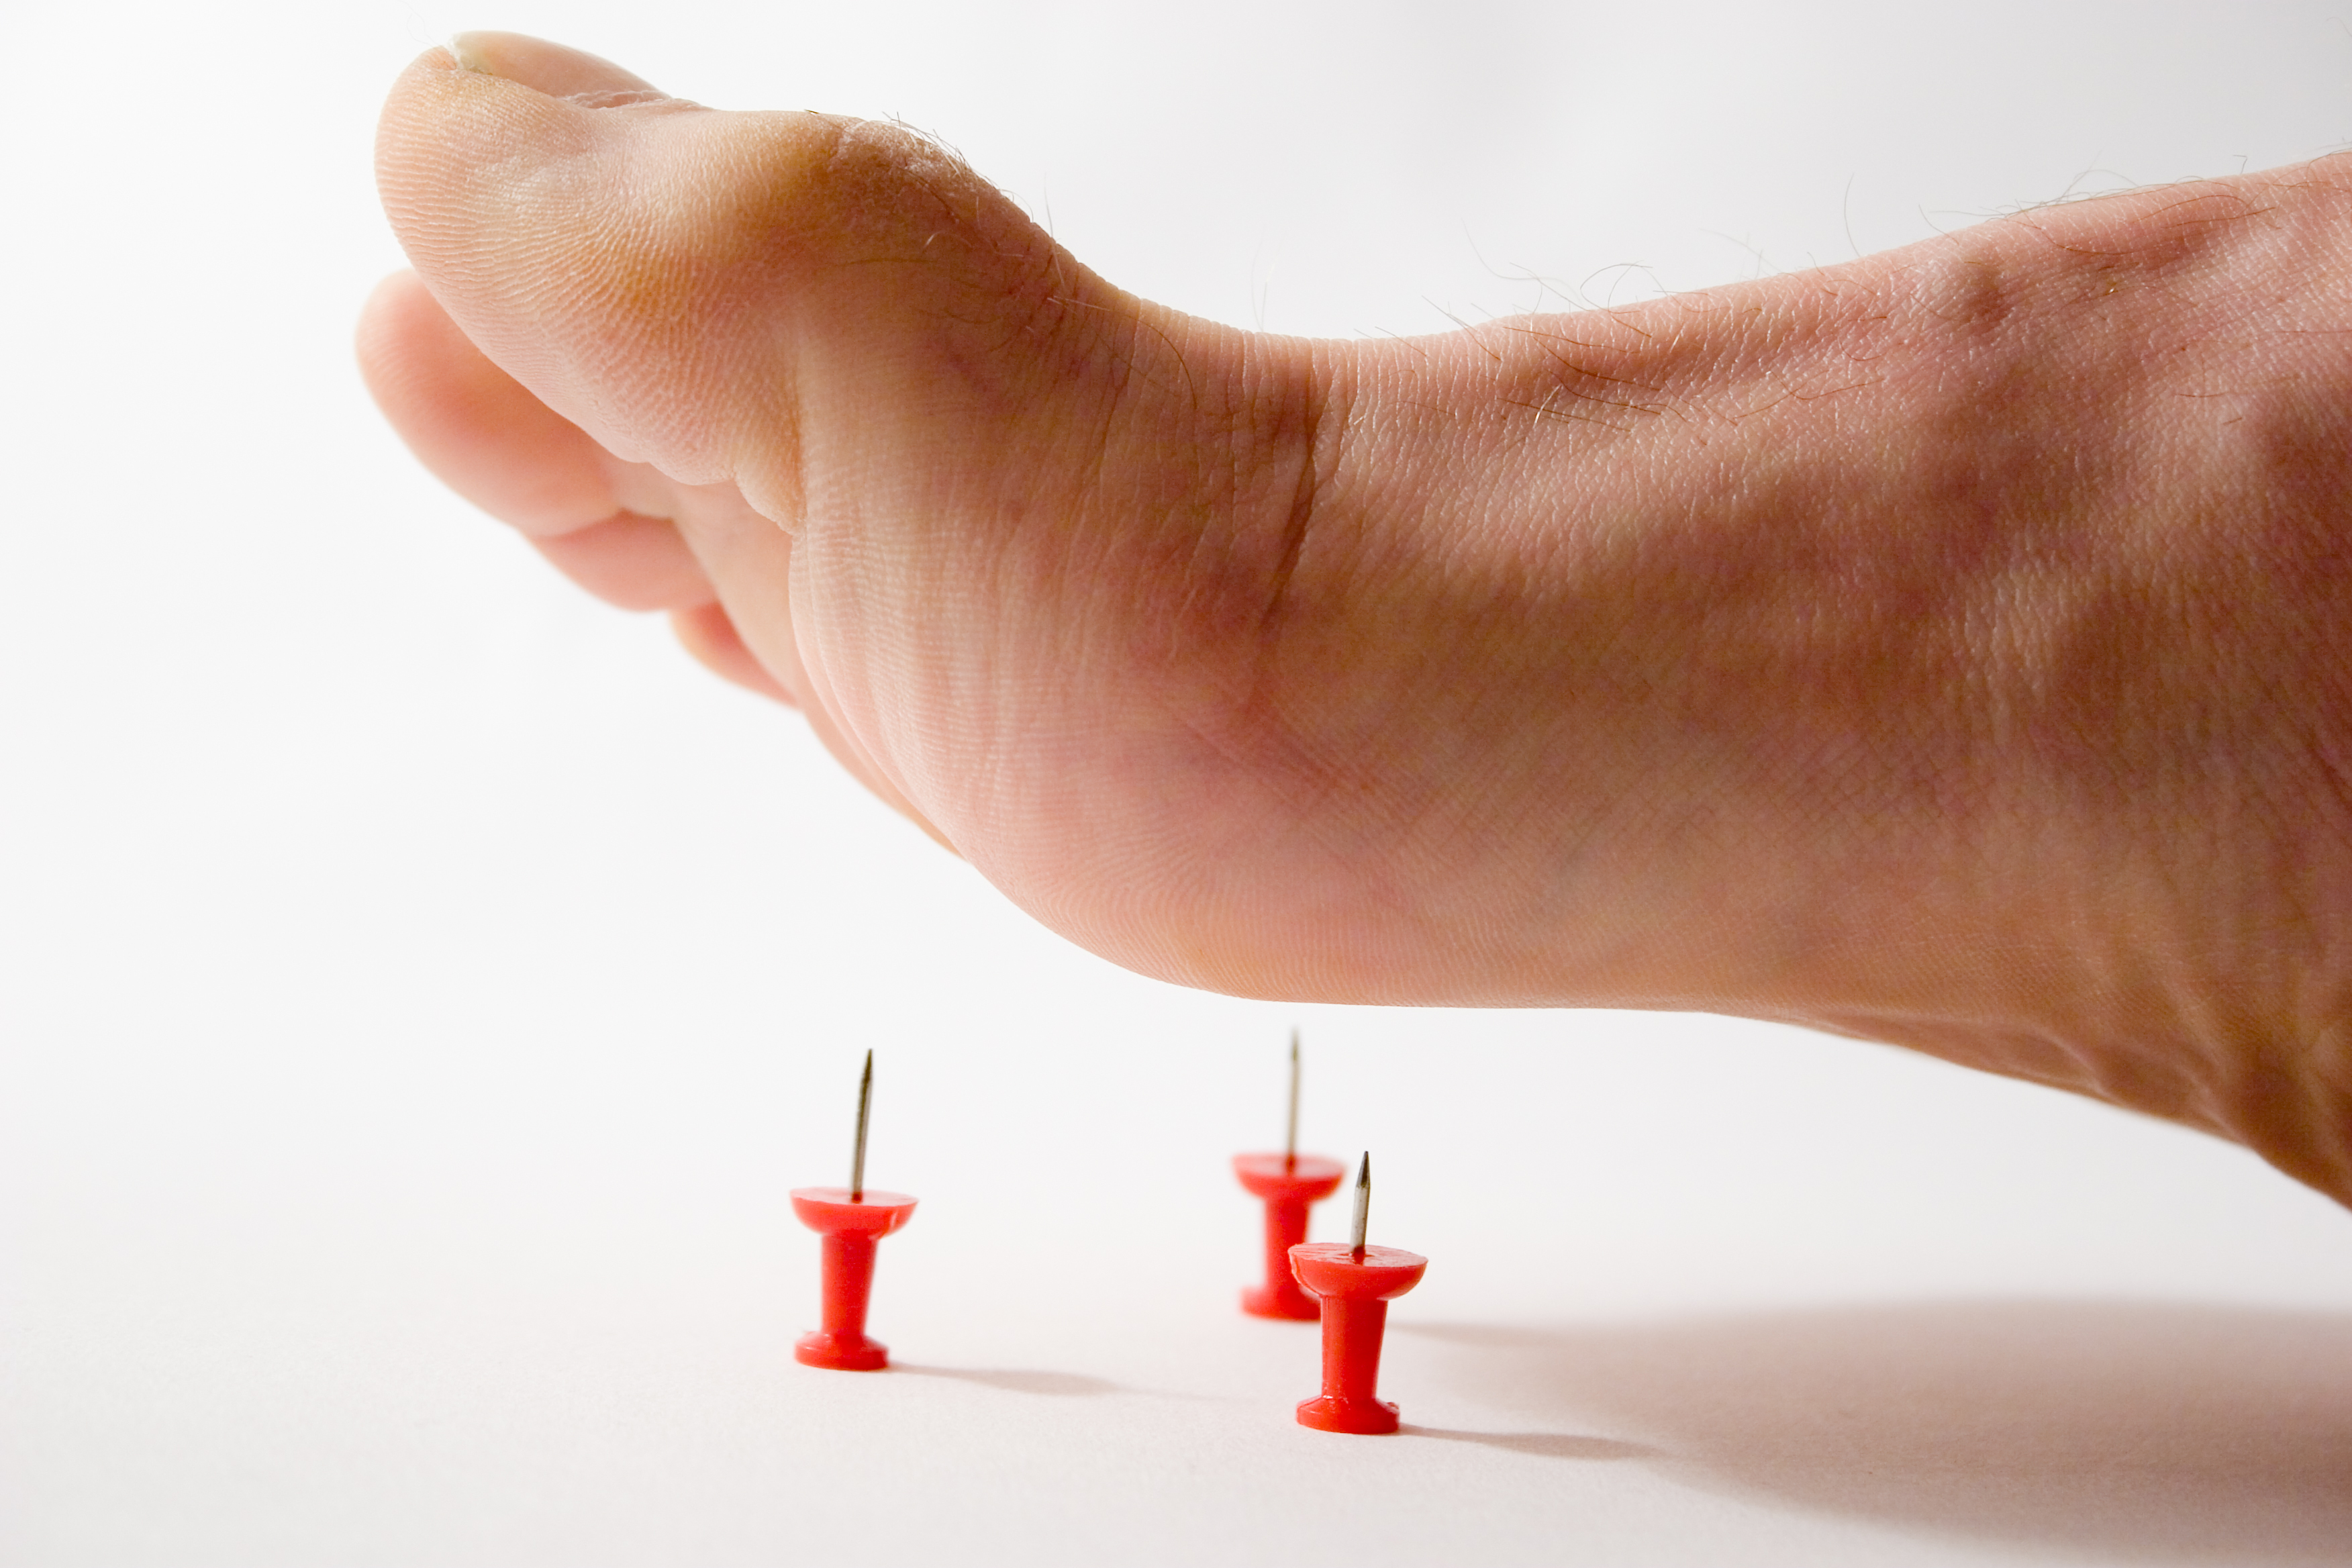 What are foot neuropathy symptoms?